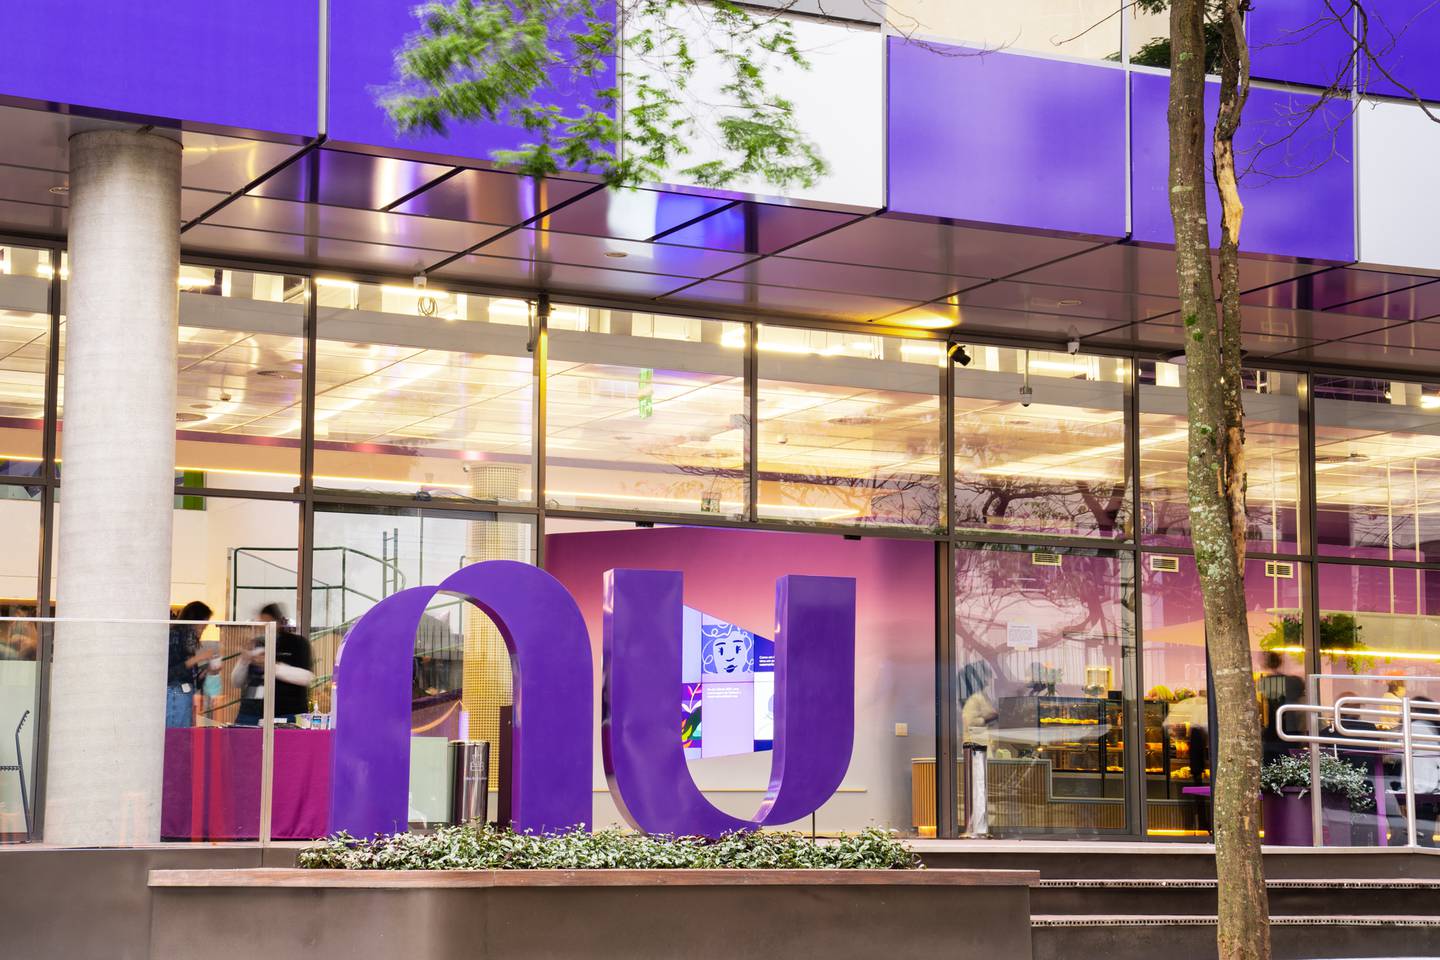 Nubank's headquarters in São Paulo. The Brazilian neobank will only be listed on the New York Stock Exchange, according to its plans announced September 15.